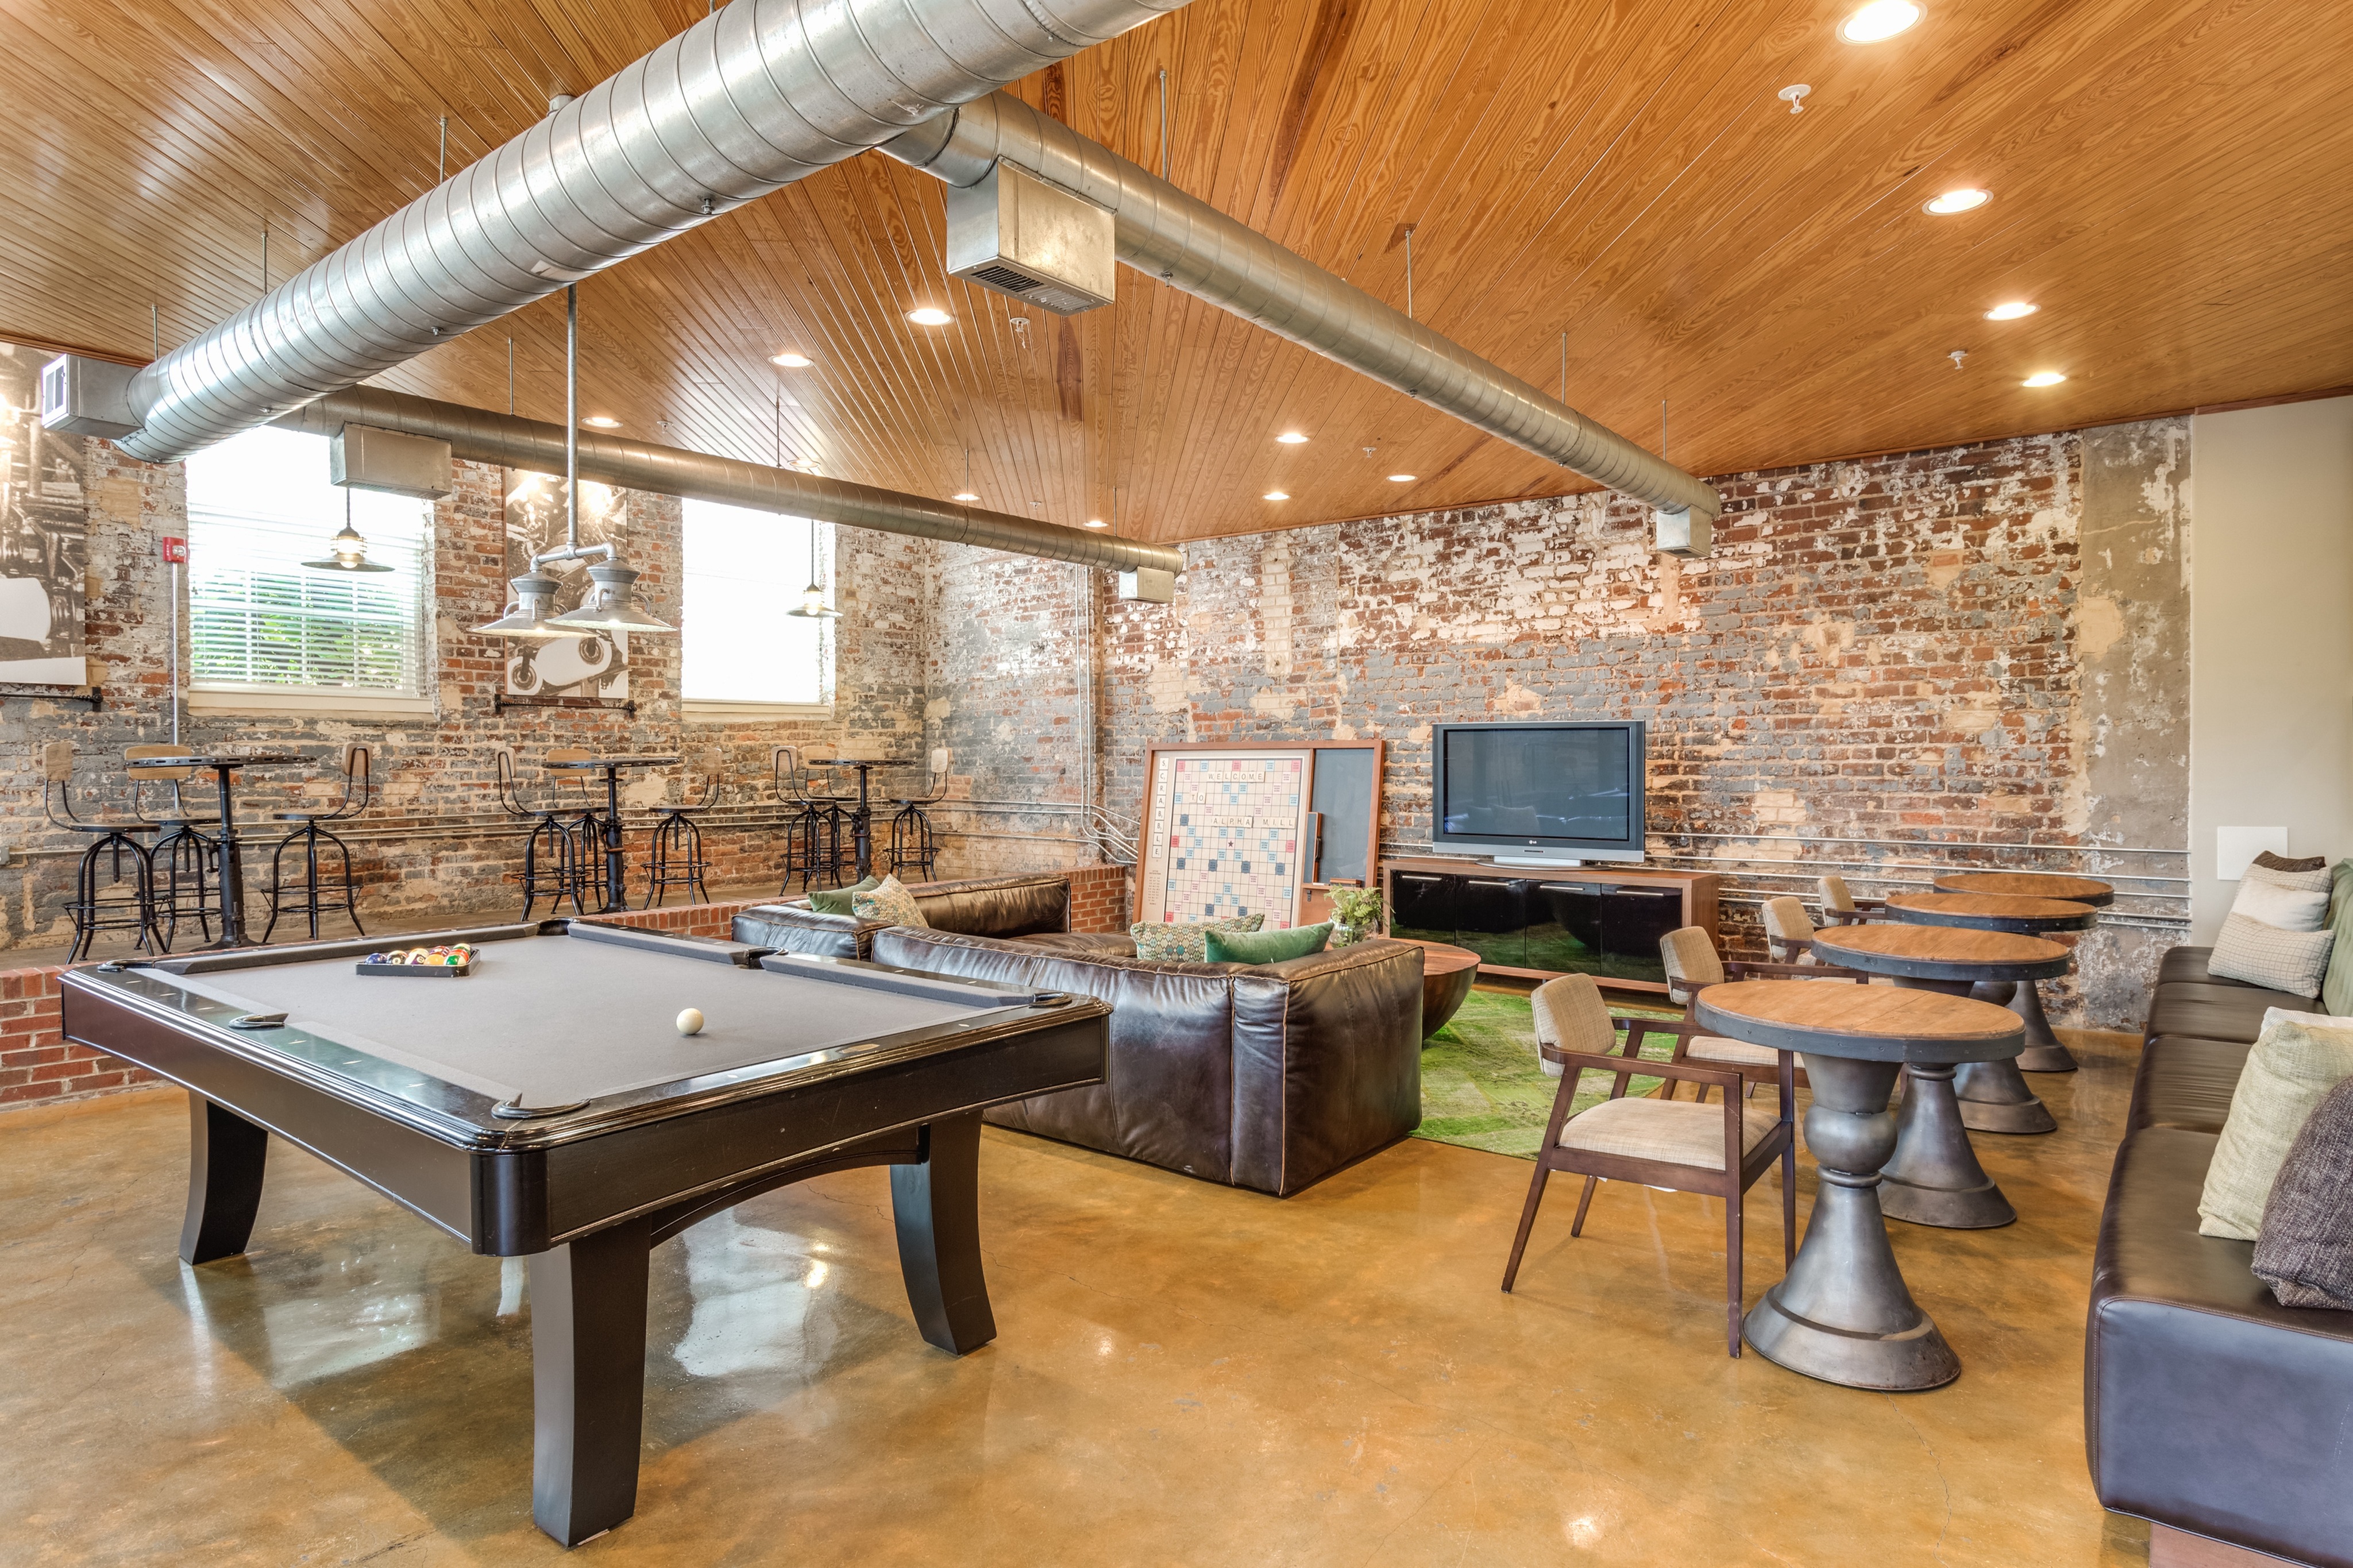 View of Resident Lounge, Showing Pool Table, Sitting Areas, TV, and Mill Architecture at Alpha Mill Apartments